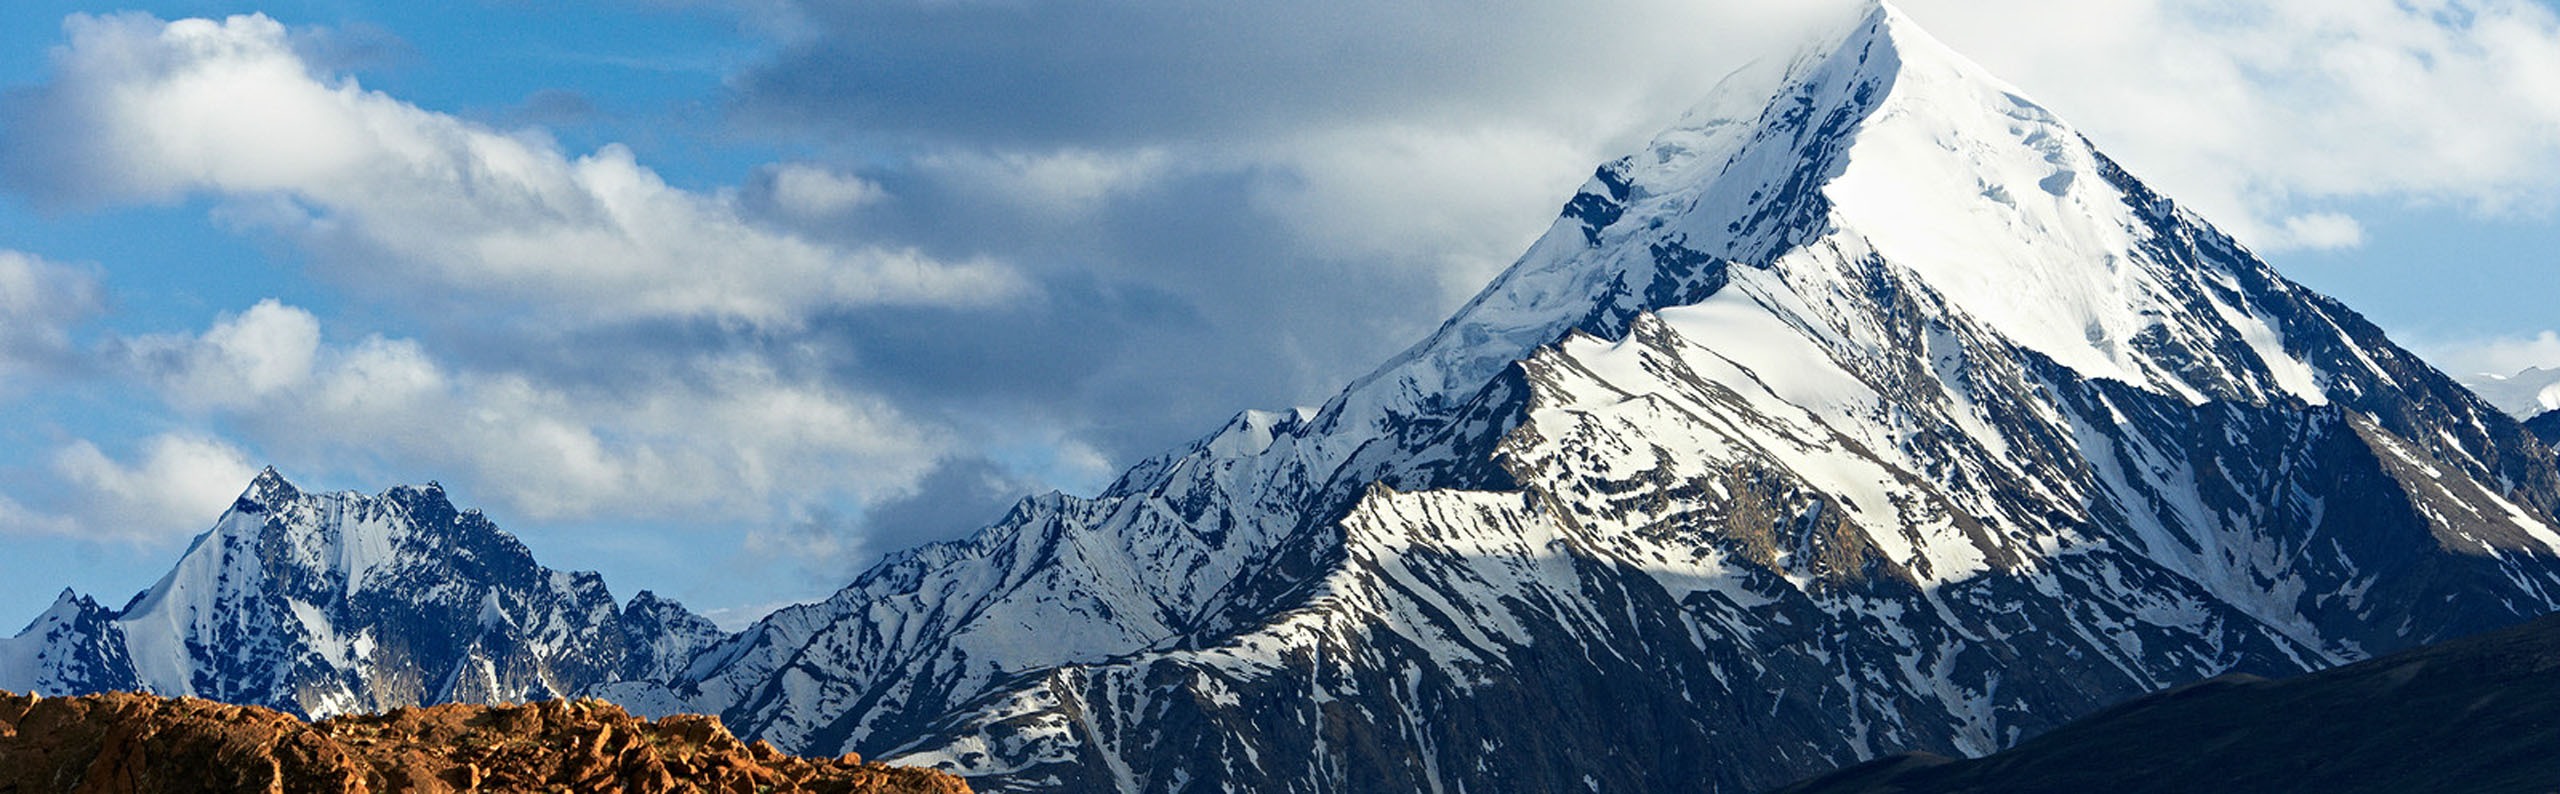 The Greater Himalayas 